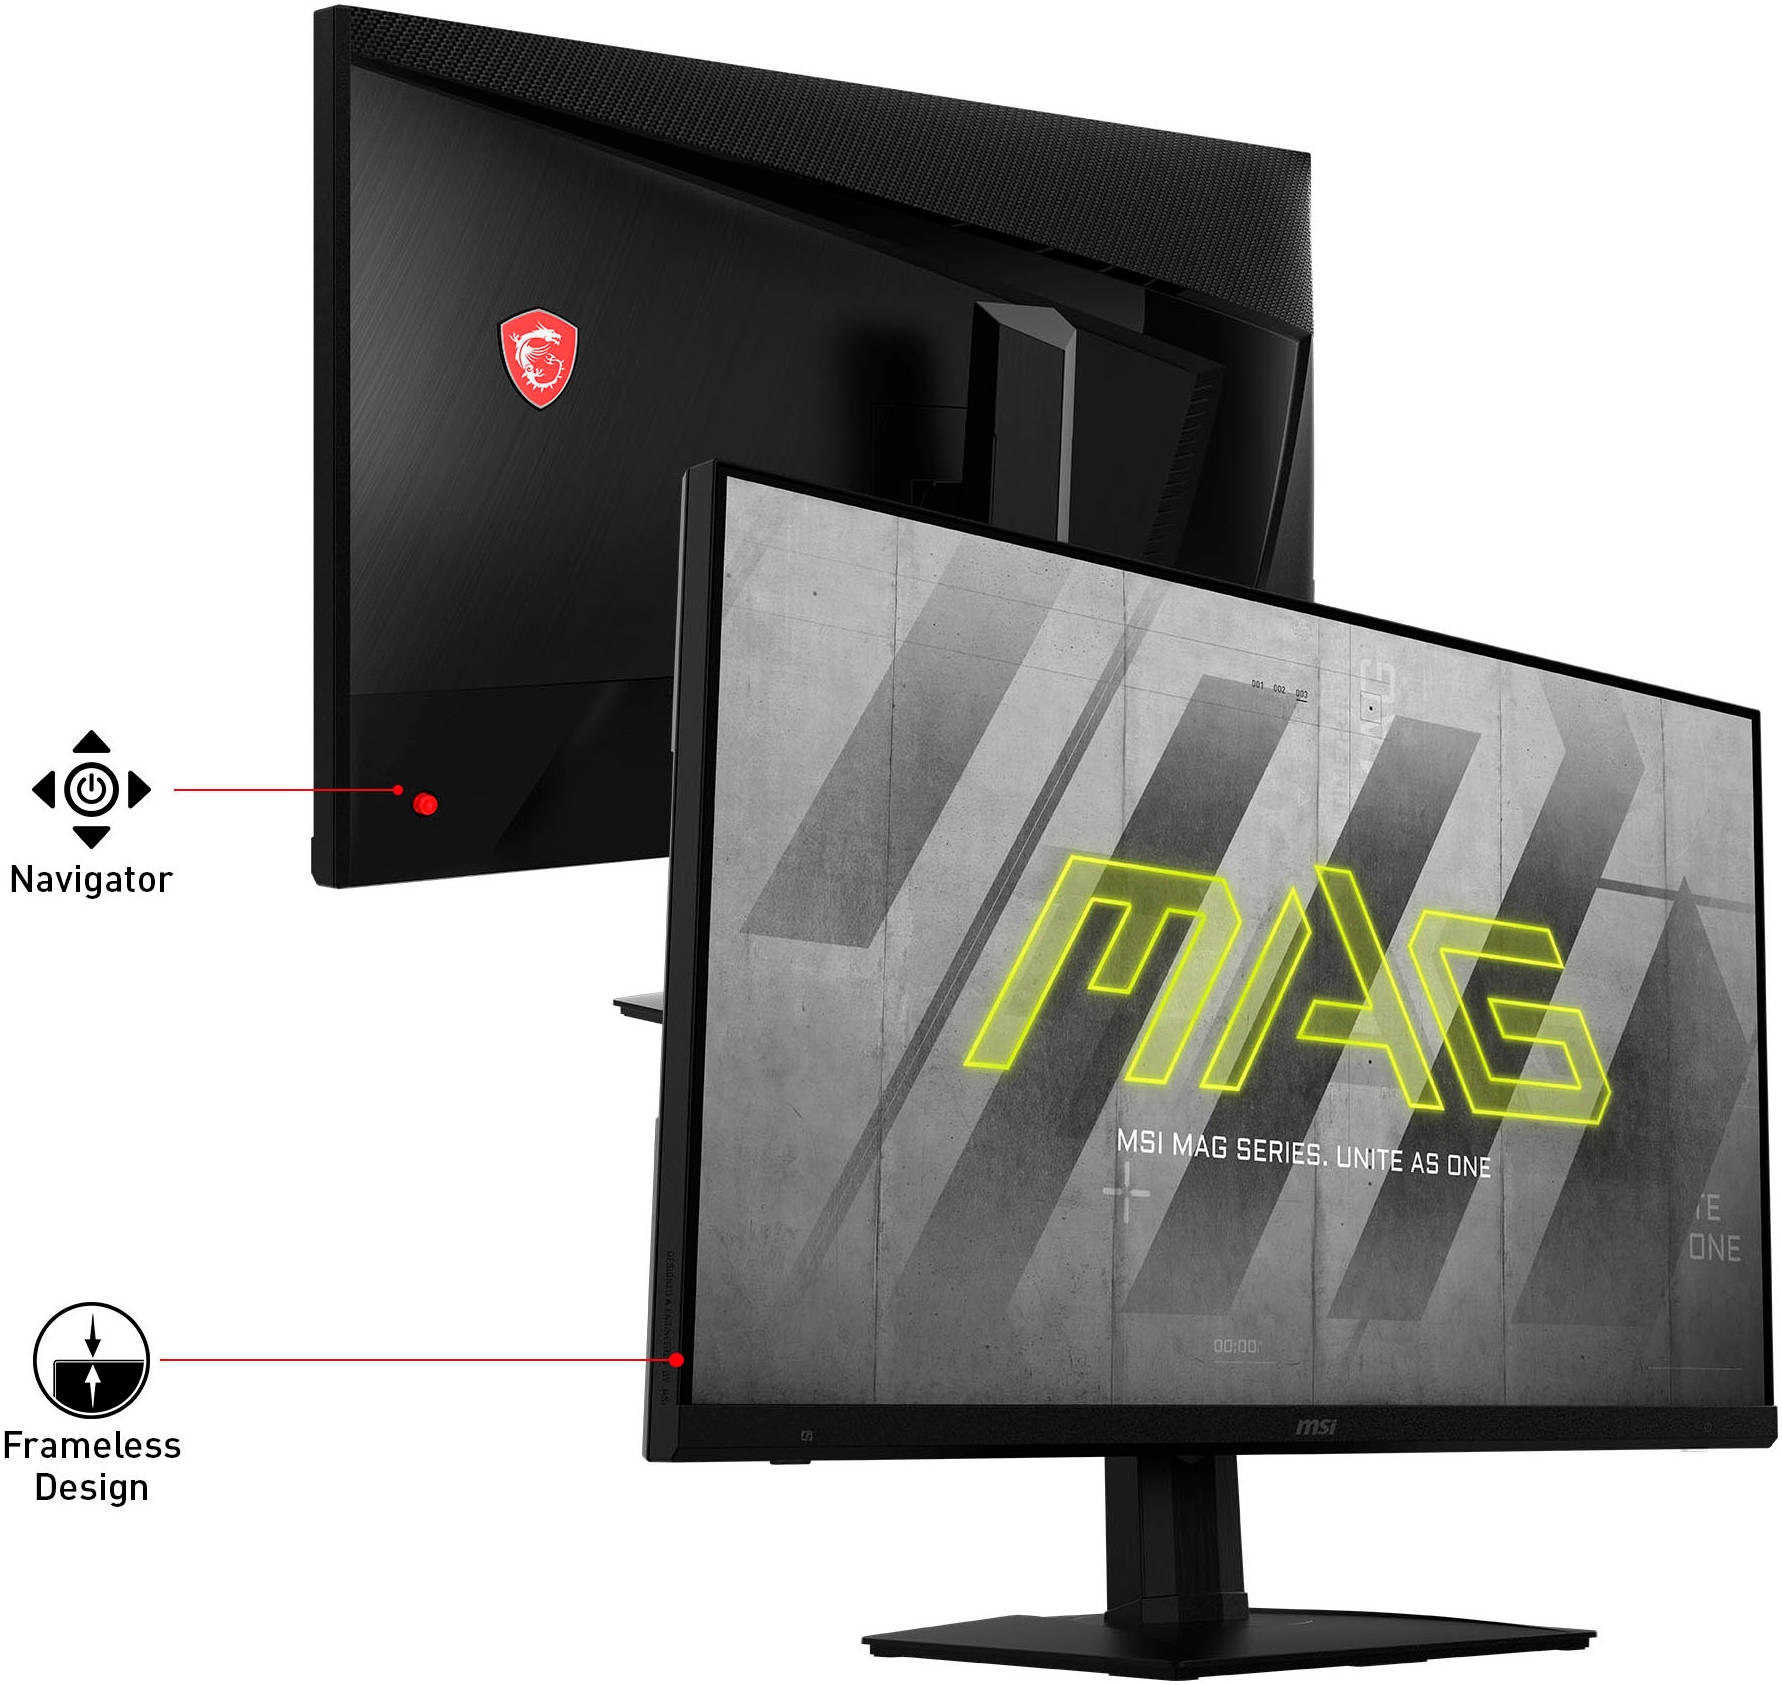 MSI Gaming-LED-Monitor »MAG 323UPF«, 81 cm/32 Zoll, 3840 x 2160 px, 4K Ultra HD, 1 ms Reaktionszeit, 160 Hz